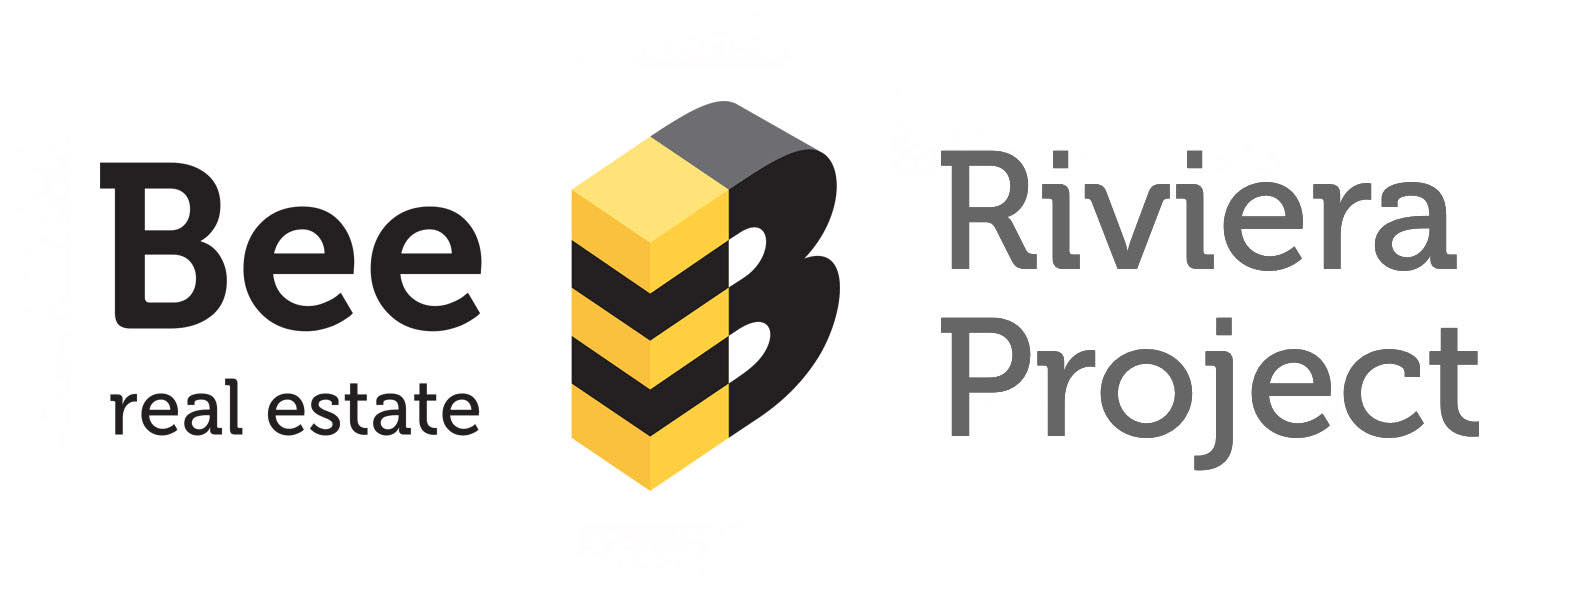 Bee Riviera Project